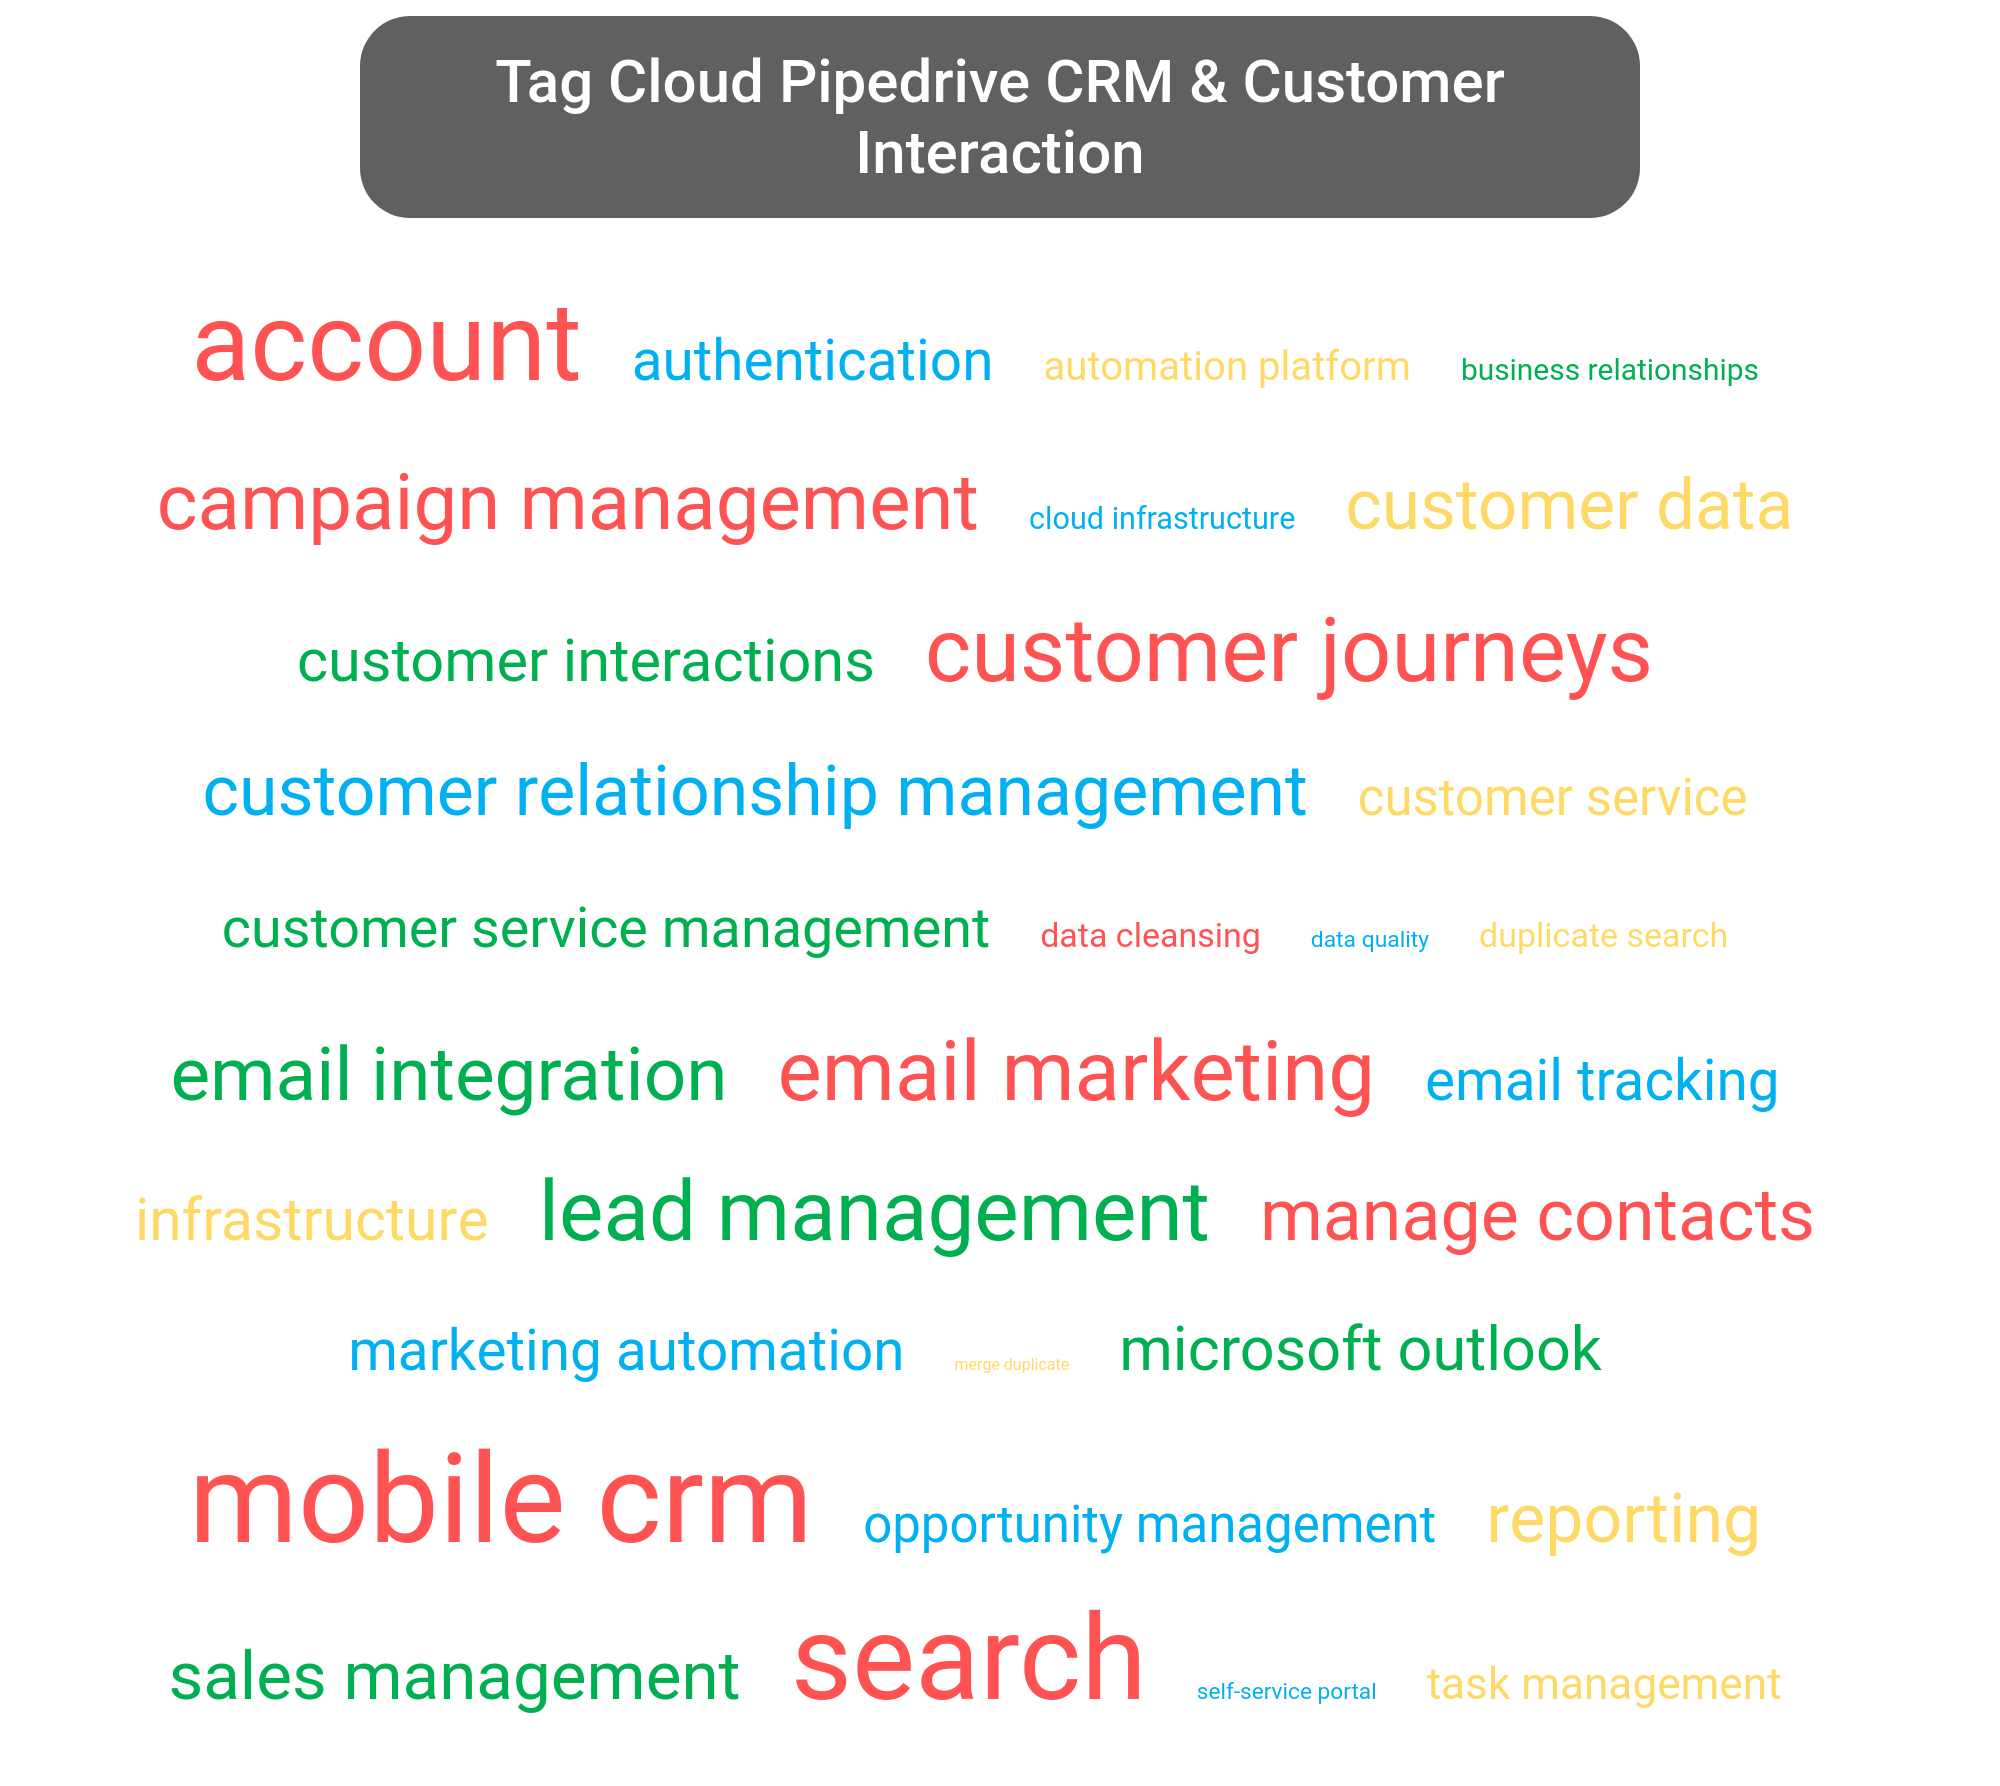 Tag cloud of the Pipedrive CRM tools.